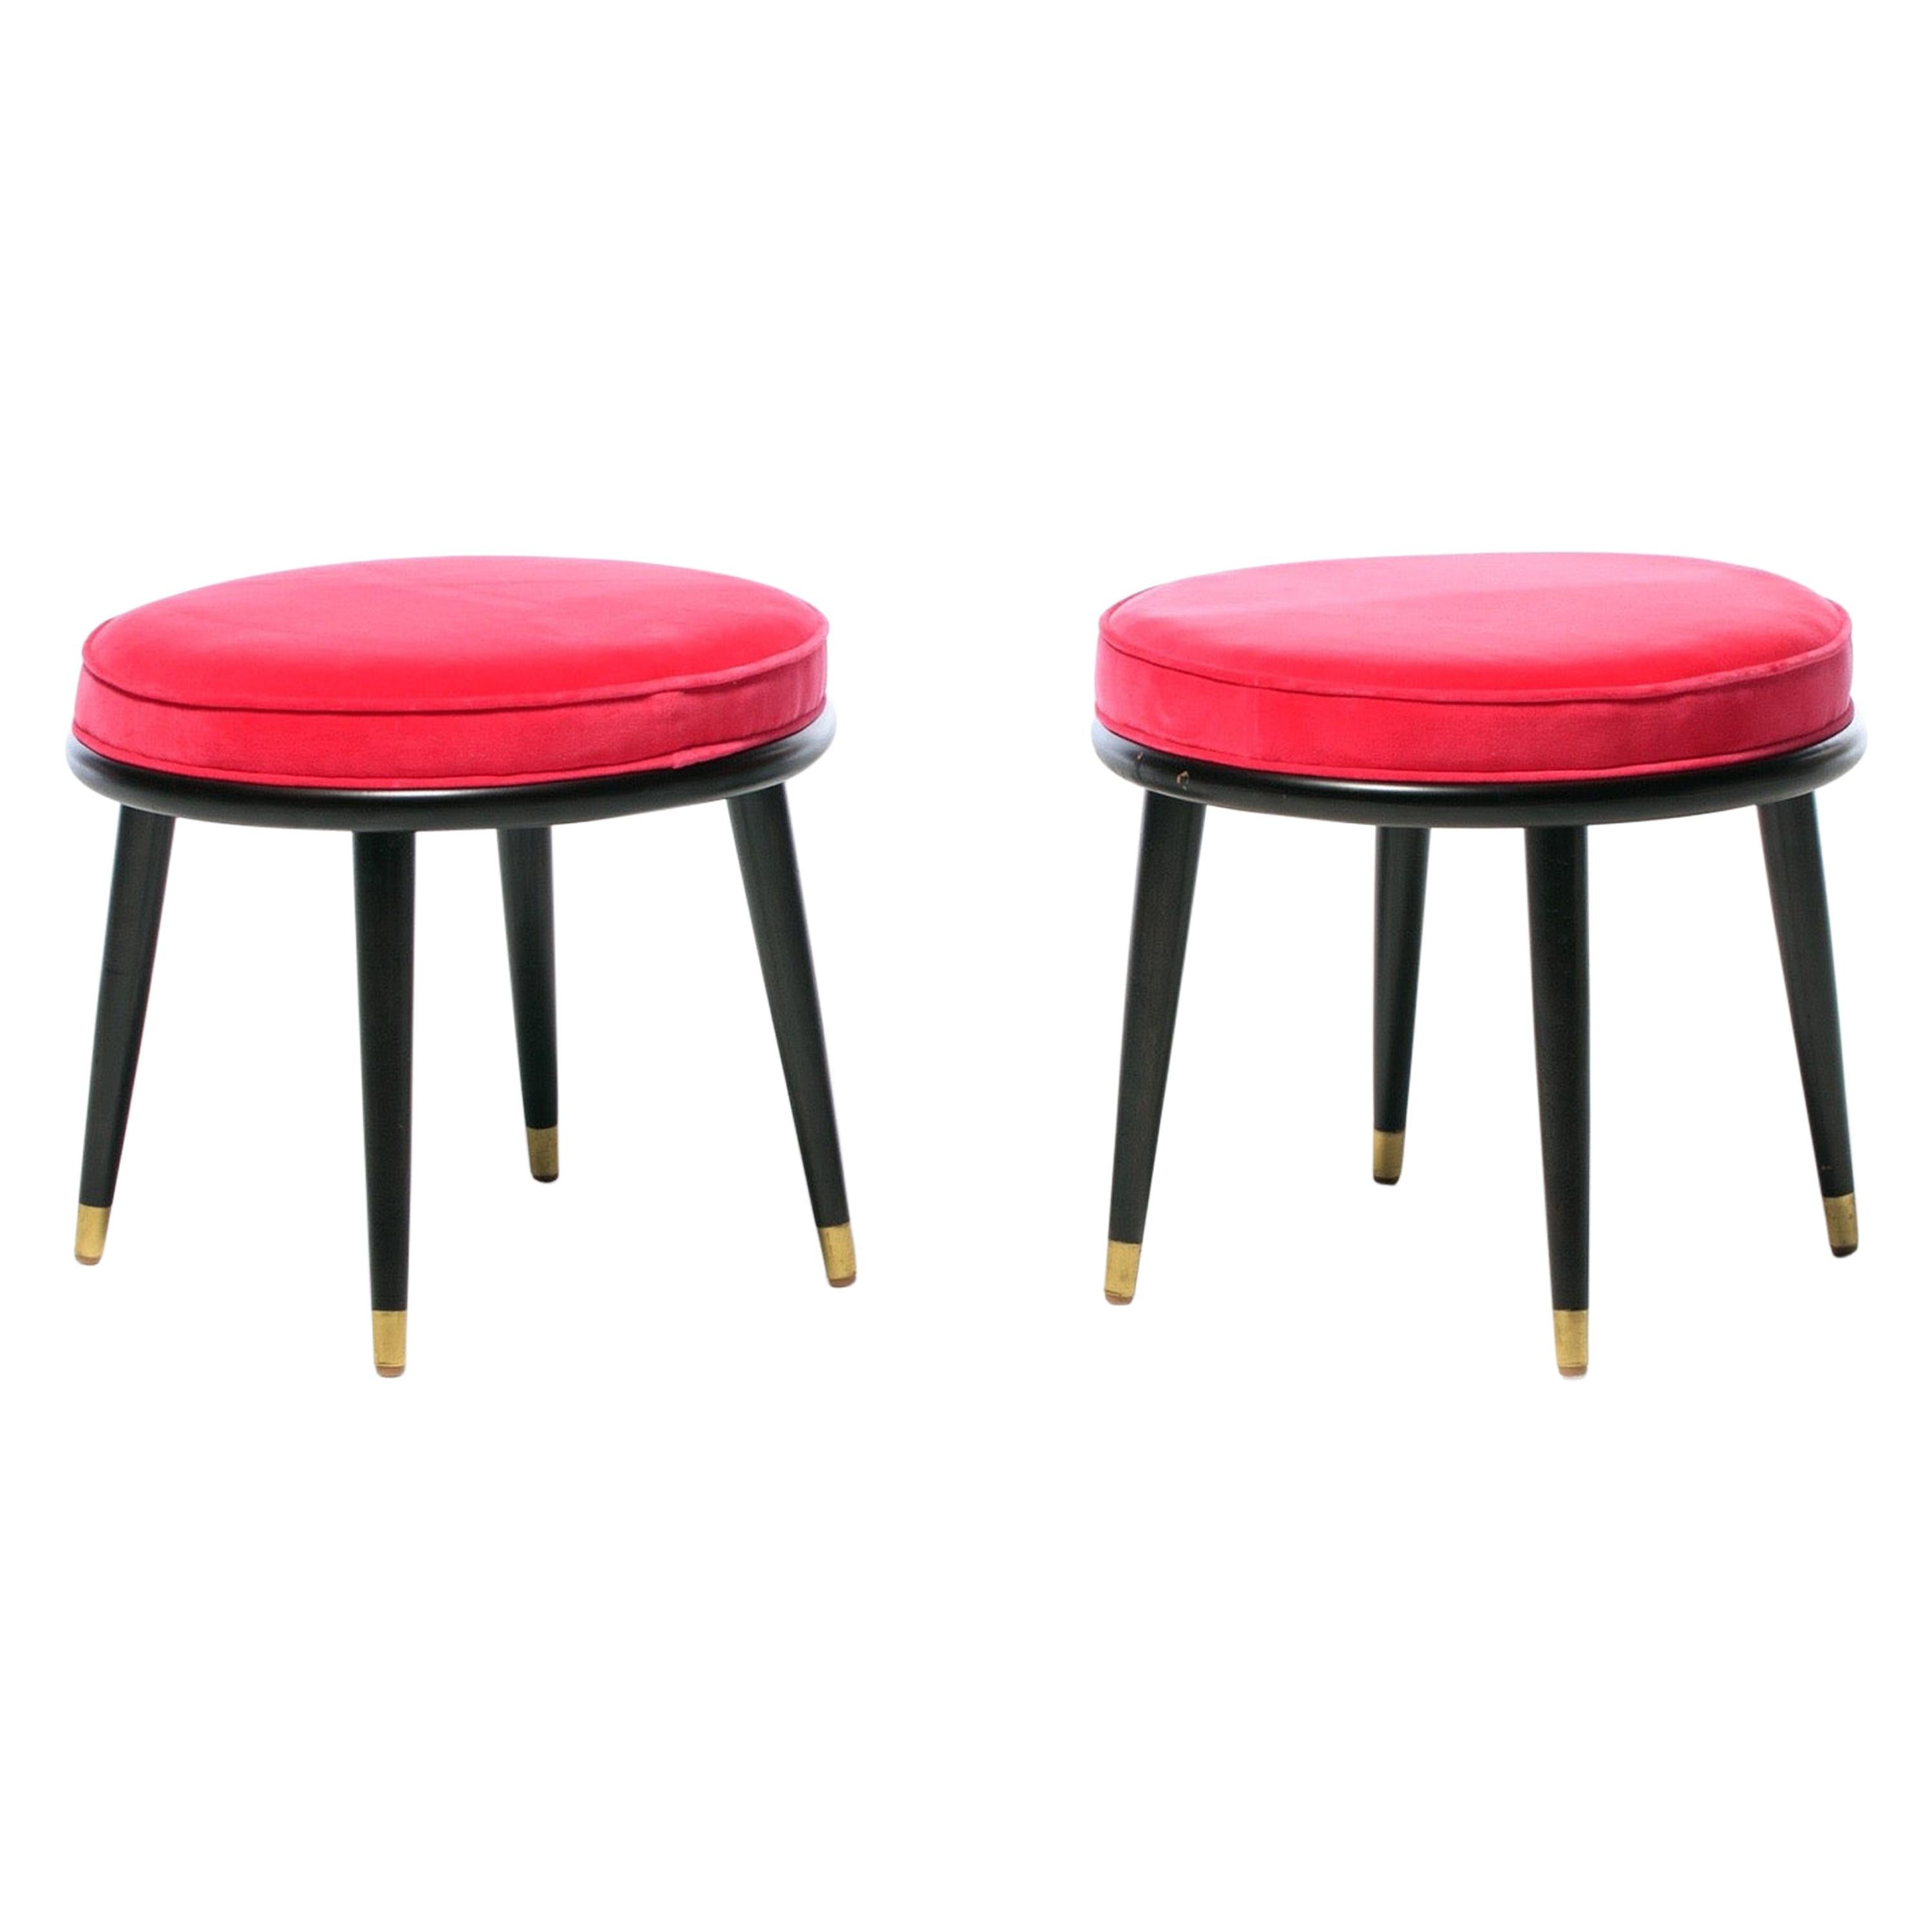 Pair of Mid Century Stools with Schiaparelli Pink Velvet Seats & Brass Sabots For Sale